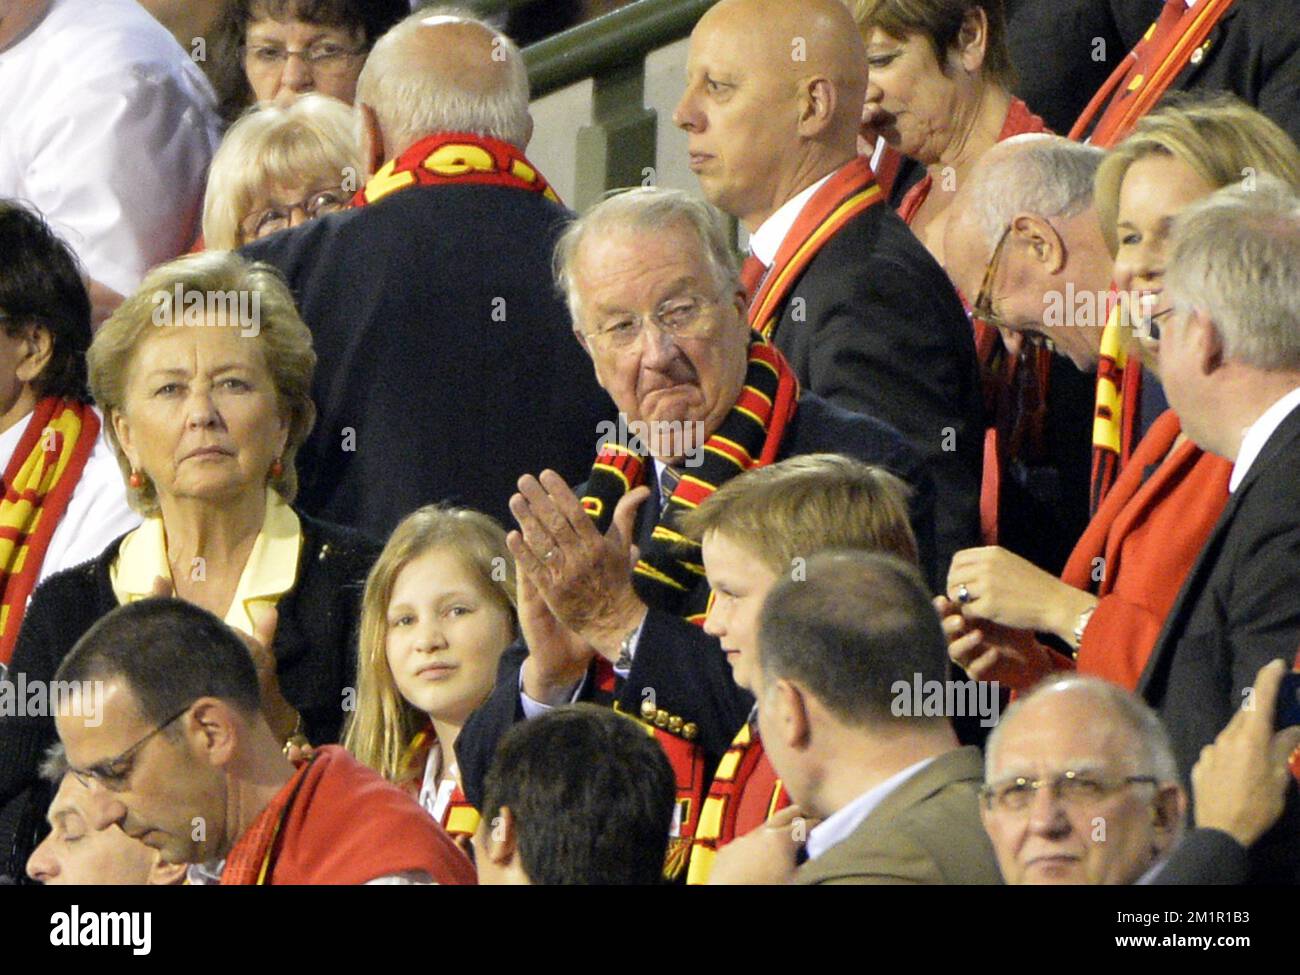 In the stands, Queen Paola of Belgium, Princess Elisabeth, King Albert II of Belgium, Prince Gabriel and Princess Mathilde of Belgium applaud at a match of the Belgian national soccer team 'Red Devils' against the Serbian national soccer team, Friday 07 June 2013 in Brussels. The game is part of the qualifying matches for the 2014 FIFA World Cup.  Stock Photo